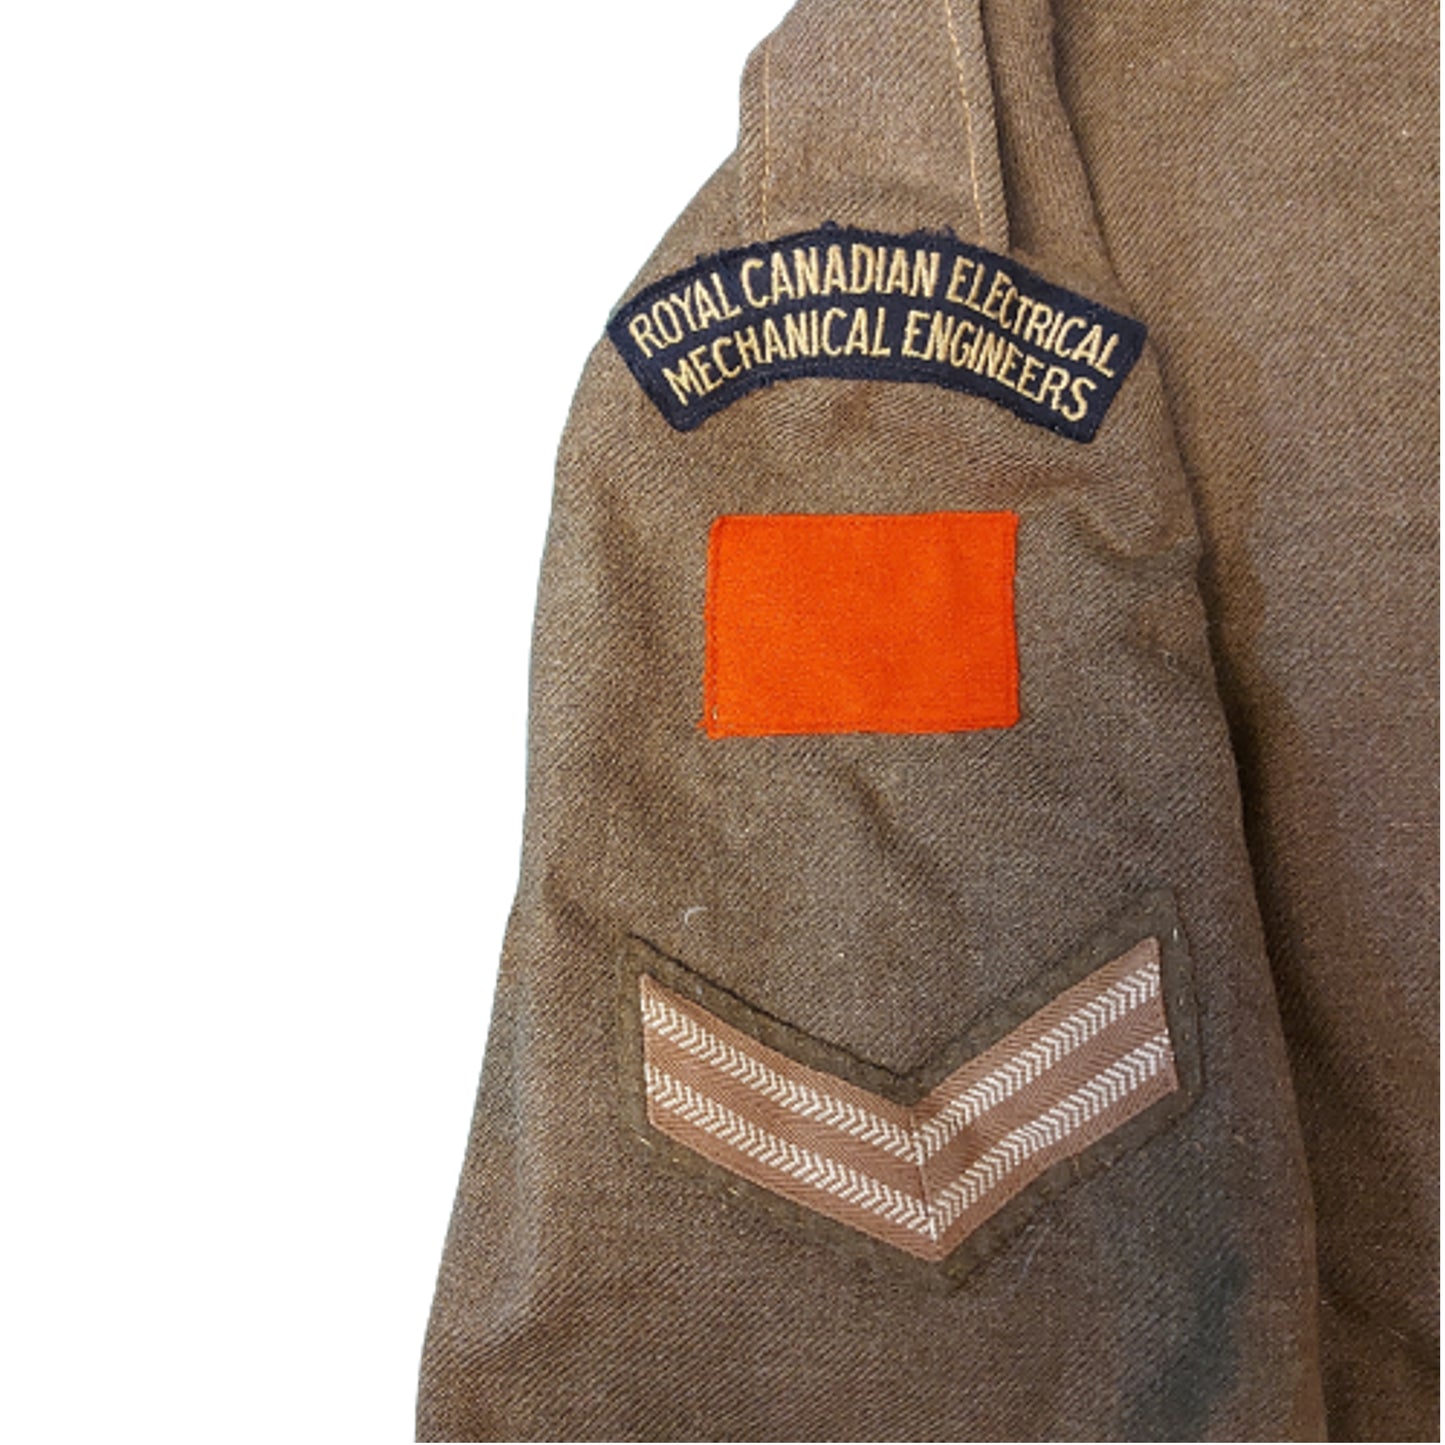 Post WW2 RCEME Royal Canadian Electrical Mechanical Engineers BD Tunic 1951